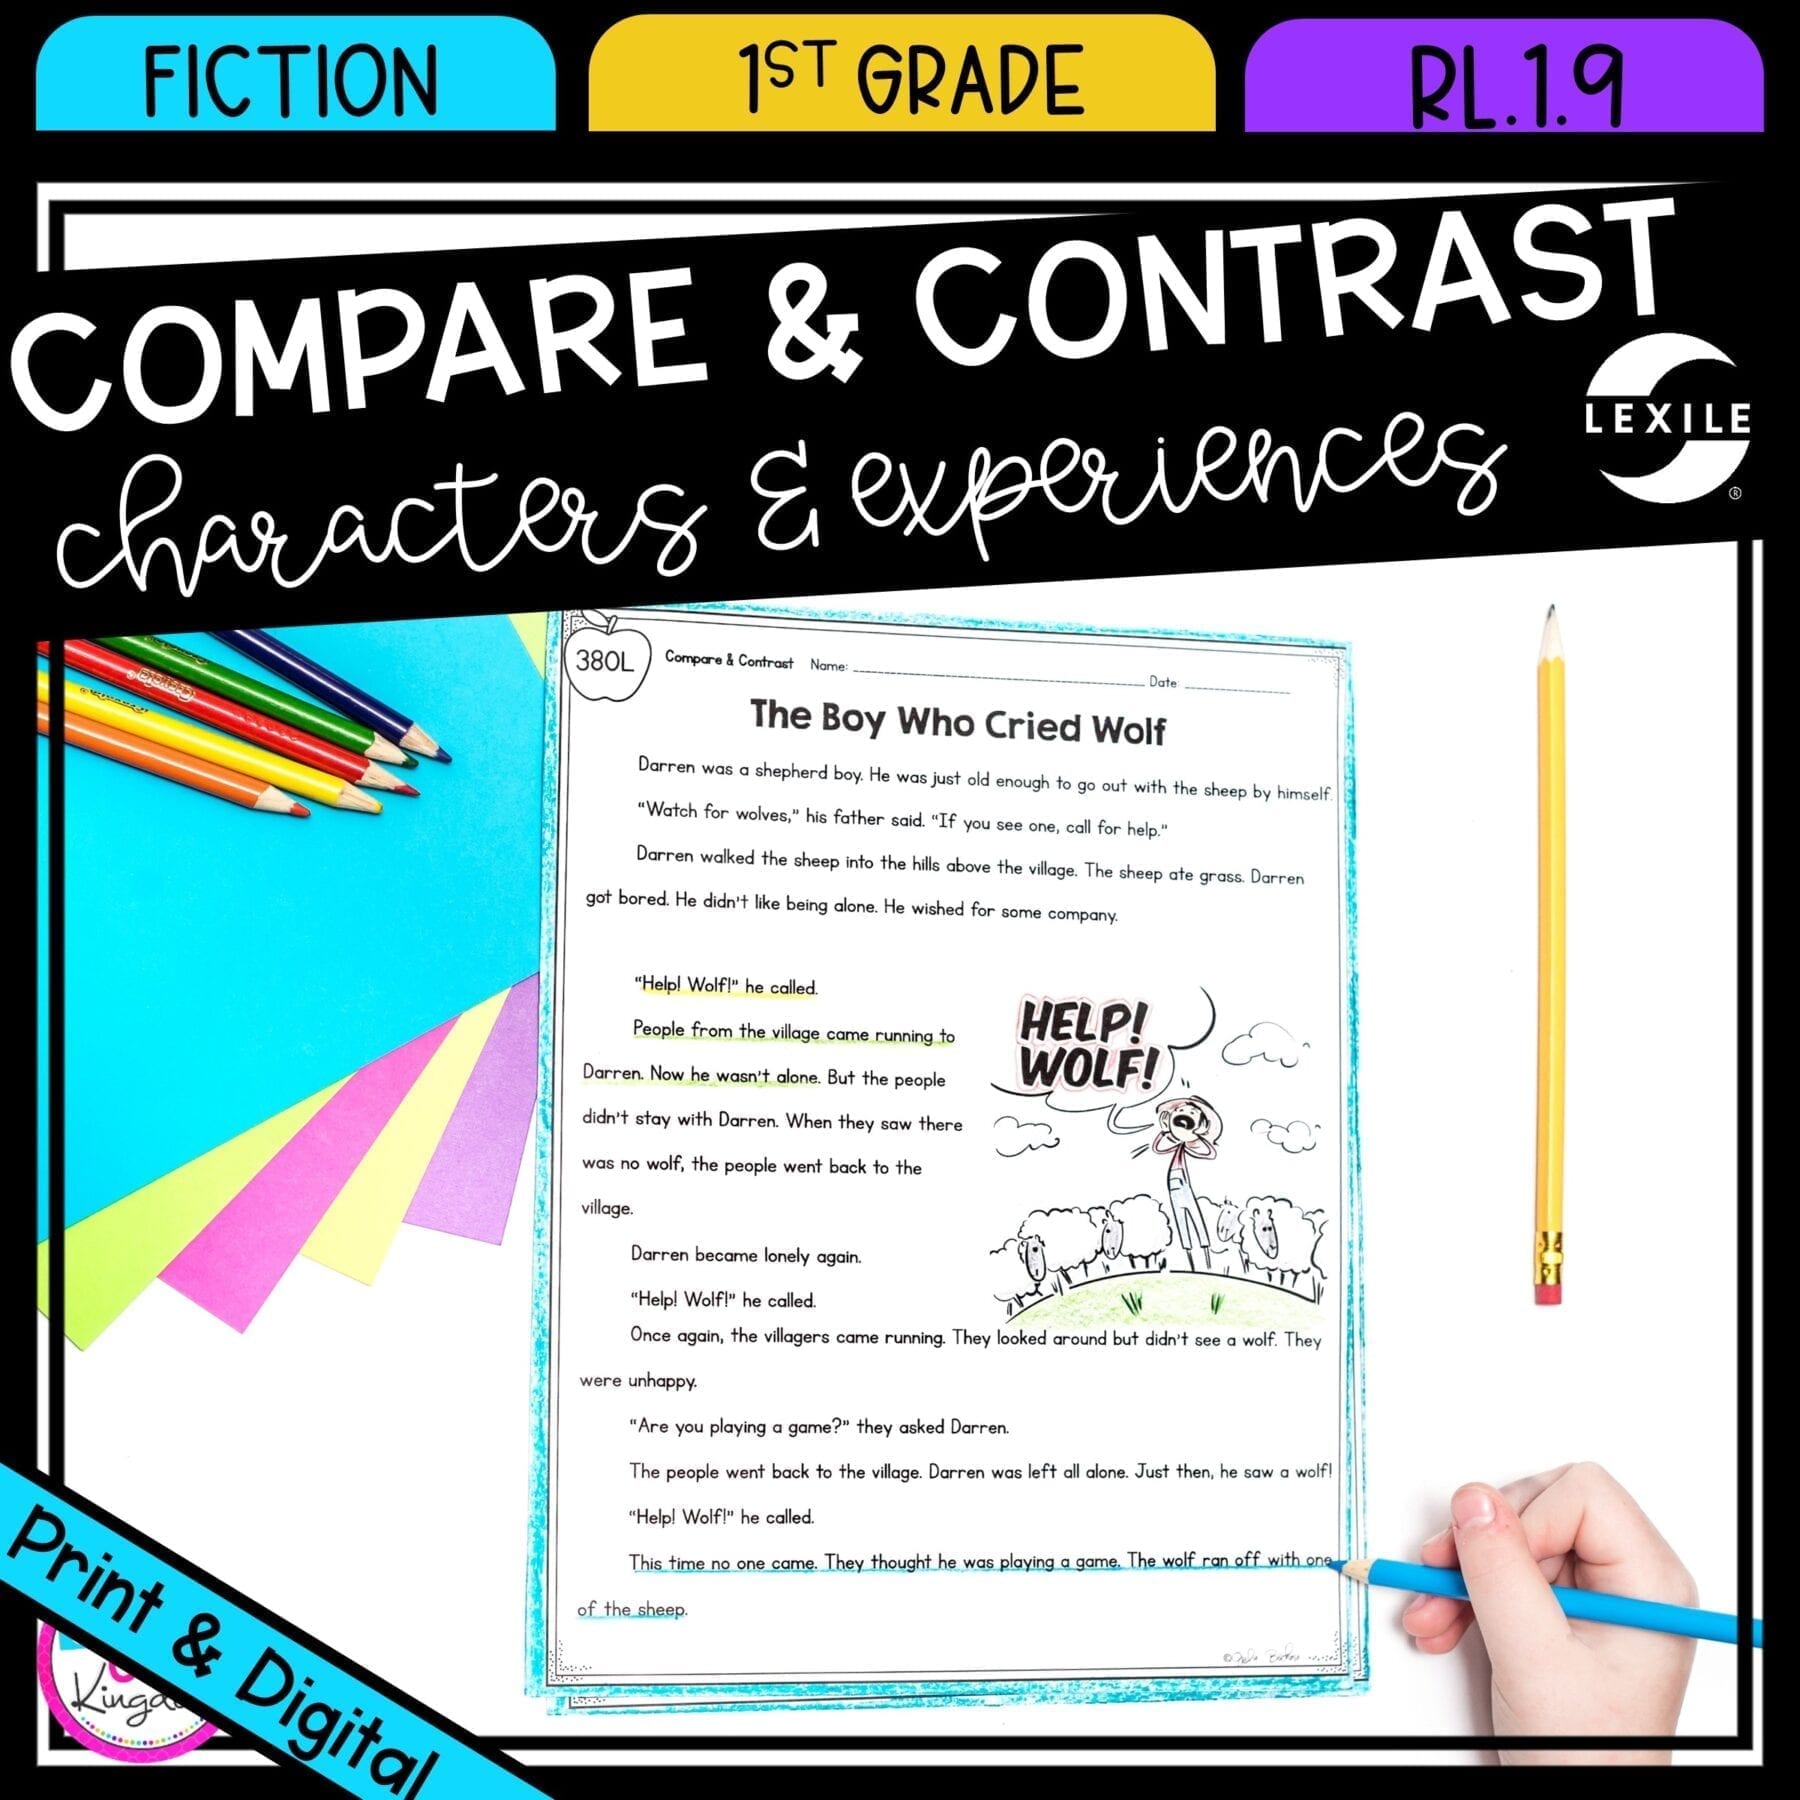 Compare & Contrast Stories for 1st grade cover showing printable and digital worksheets